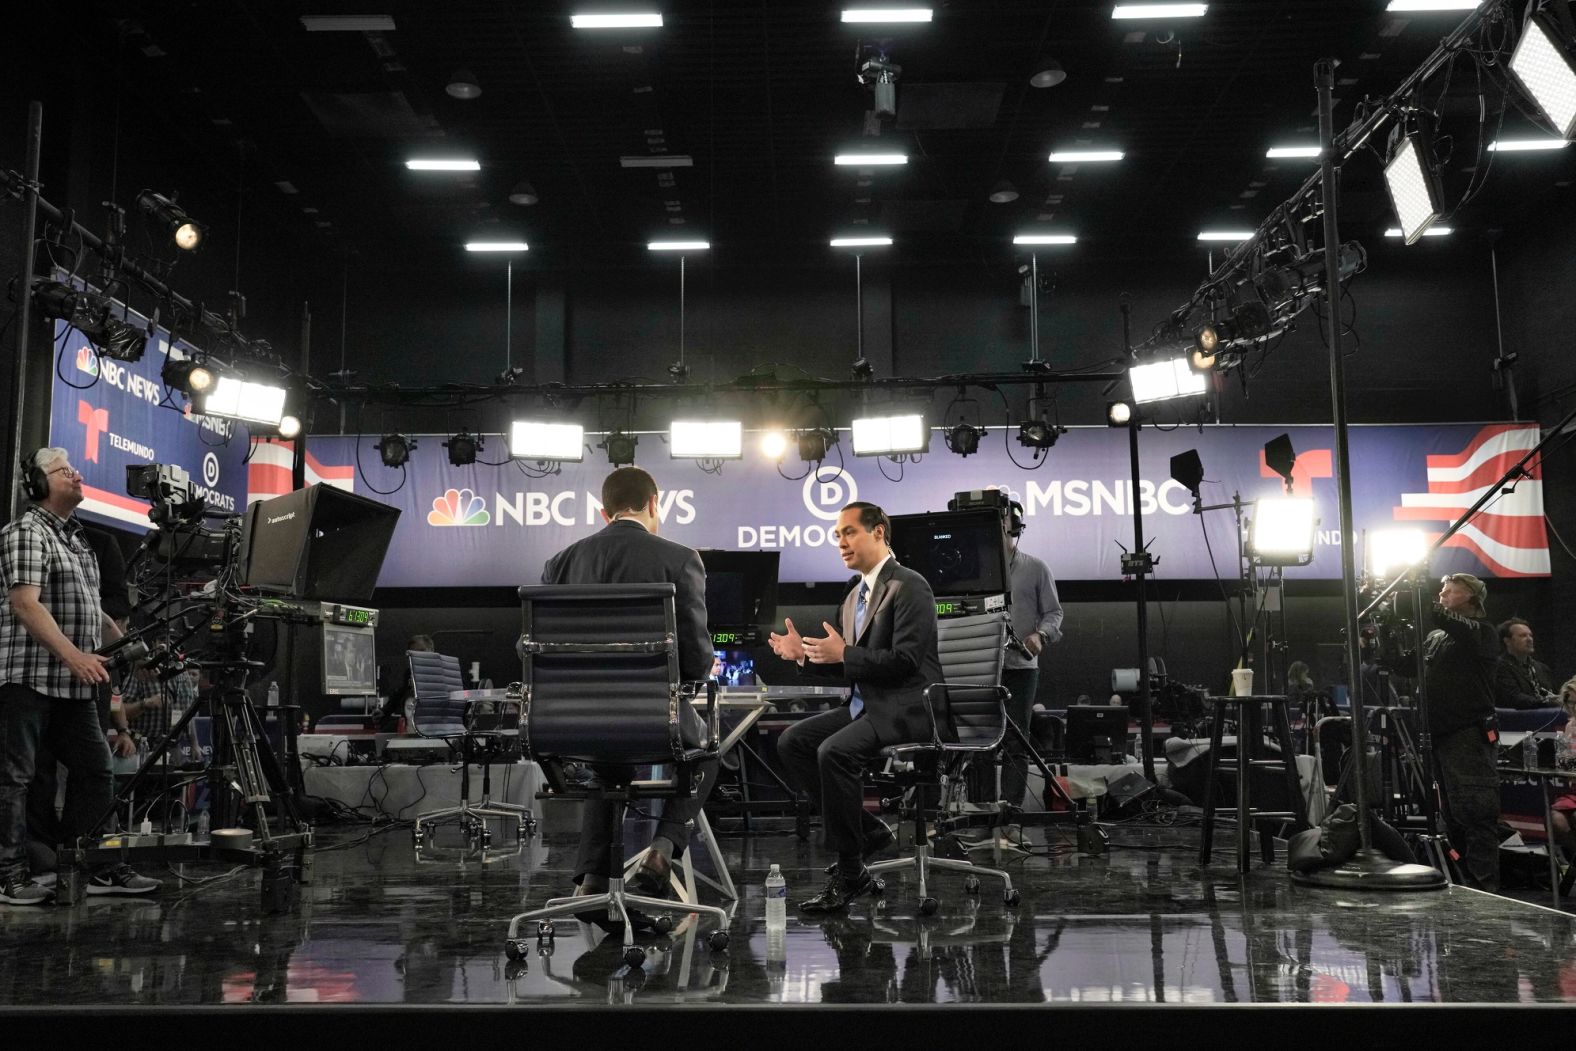 Julian Castro, a candidate who took part in Wednesday night's debate, is seen on a television set before the start of Thursday's debate. Castro was secretary of Housing and Urban Development during the Obama administration.